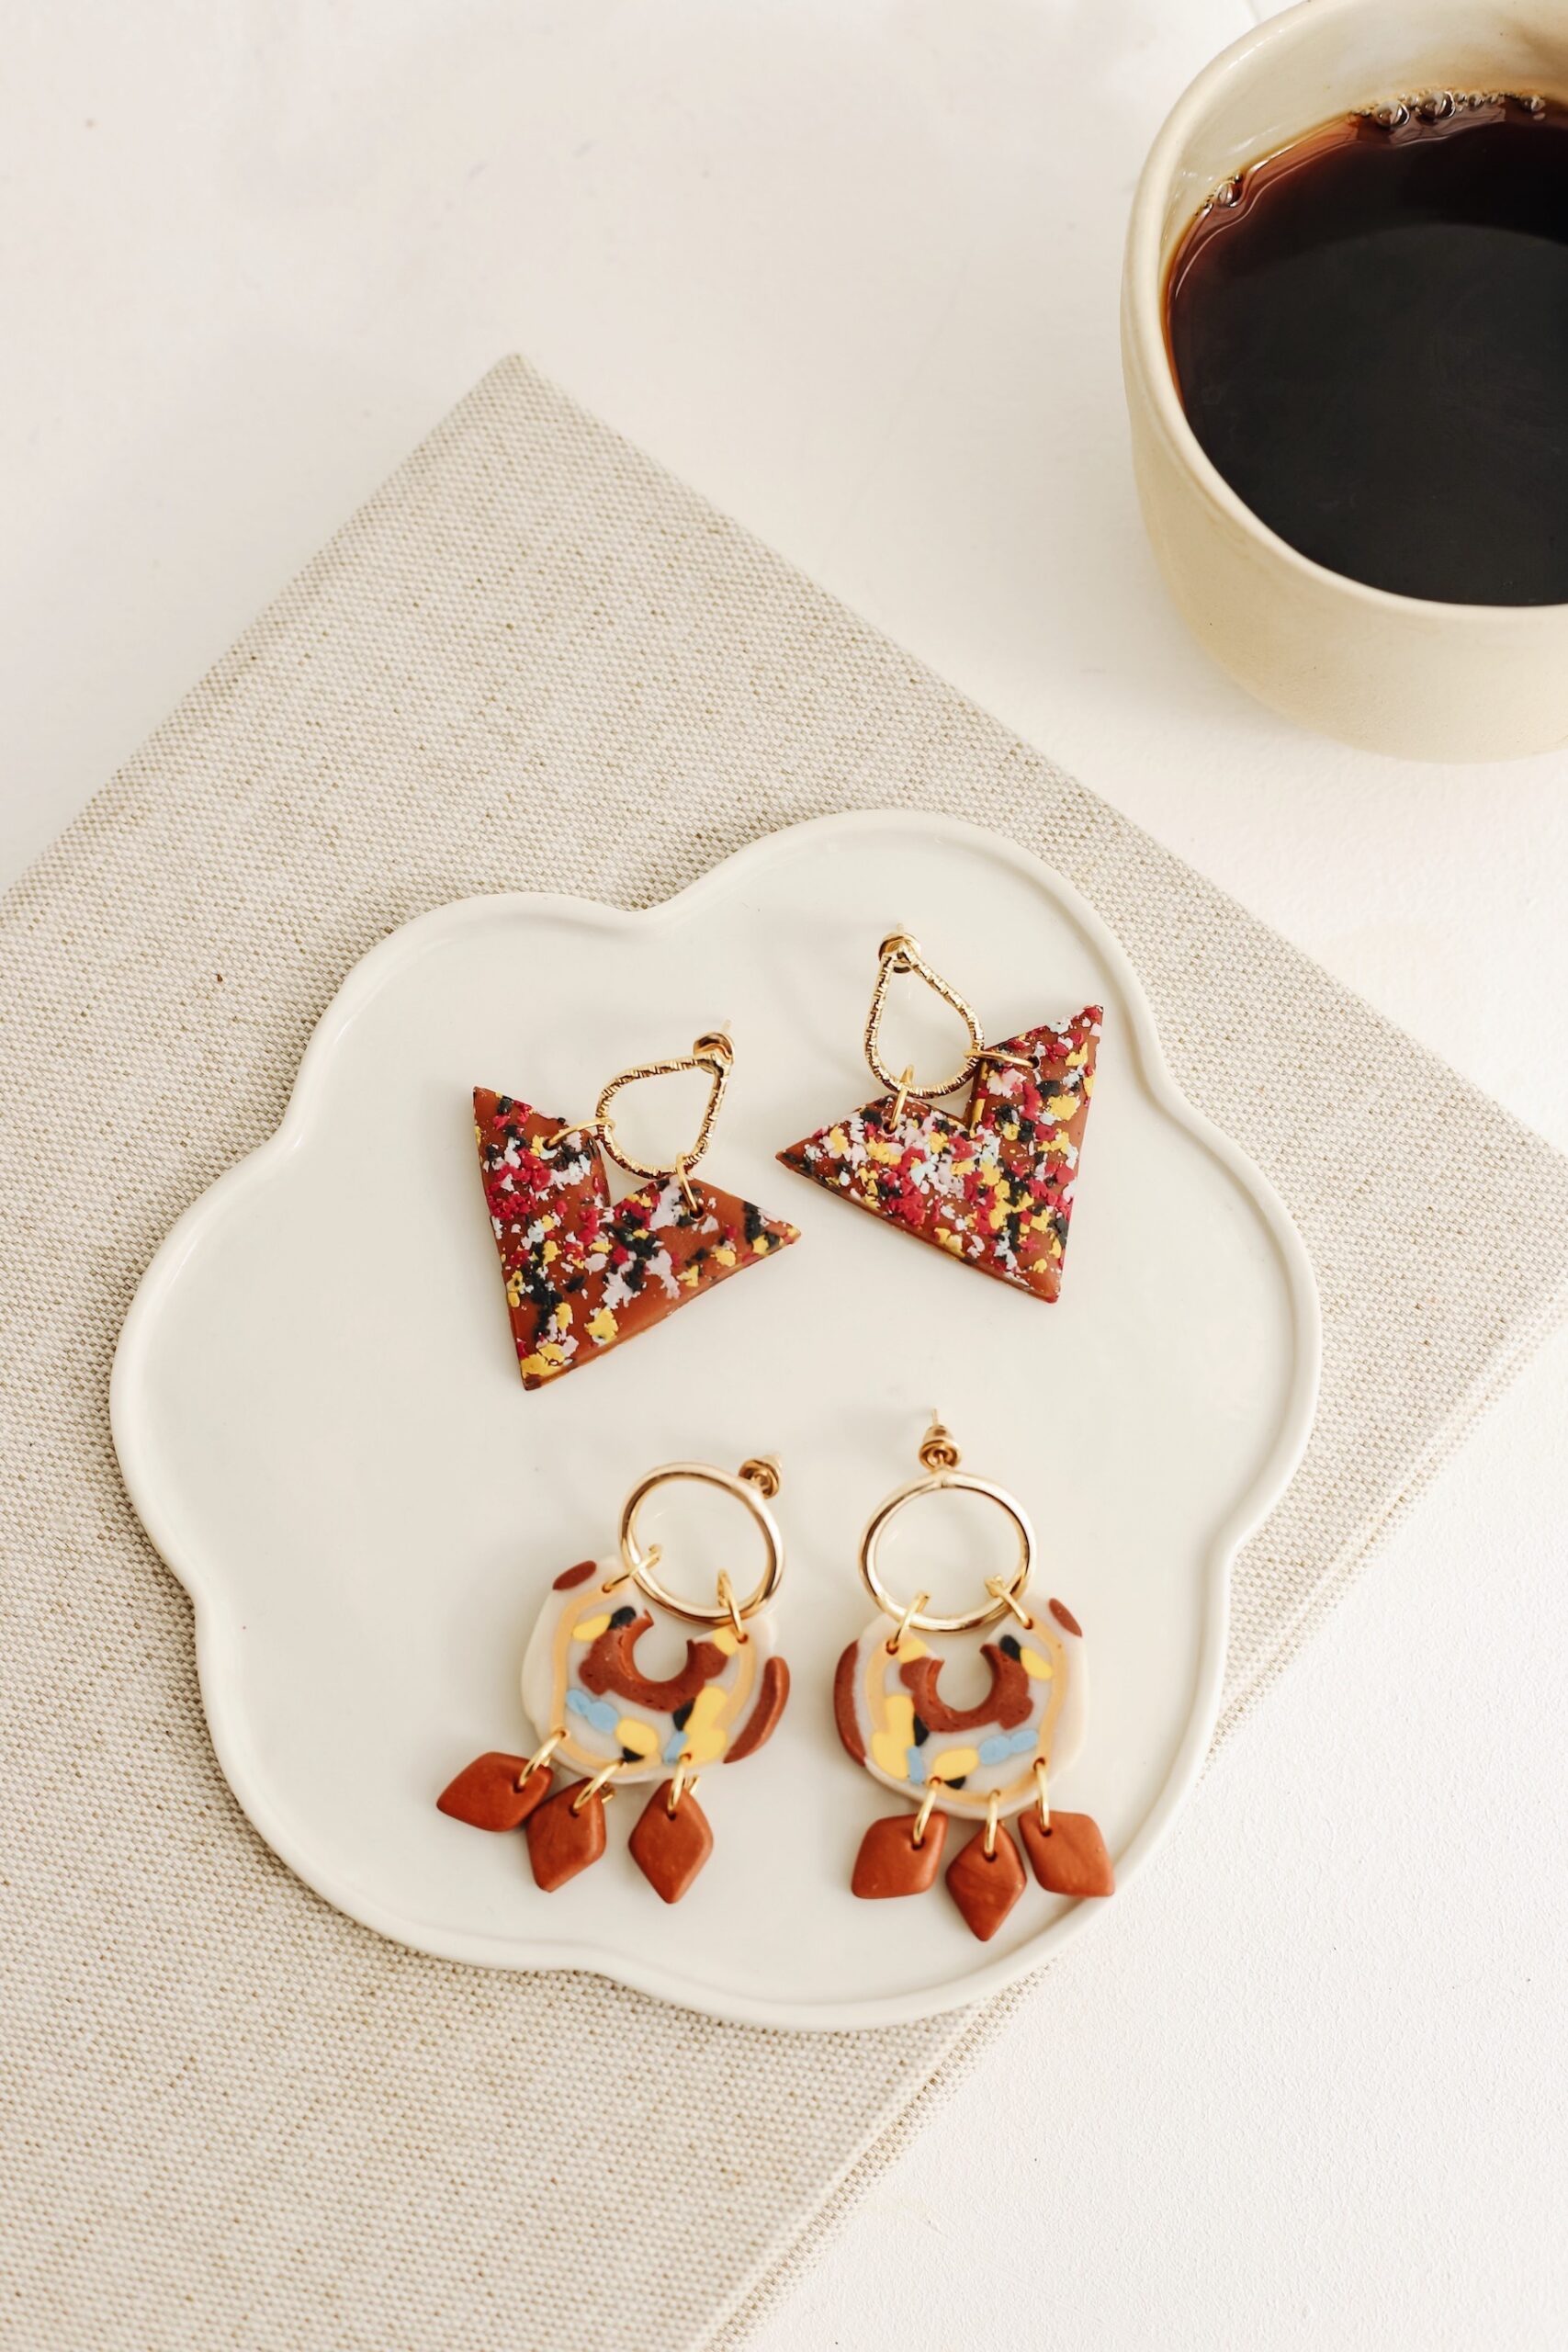 Rose is an earring was designed by a handmade woman designer. It was made of clay.